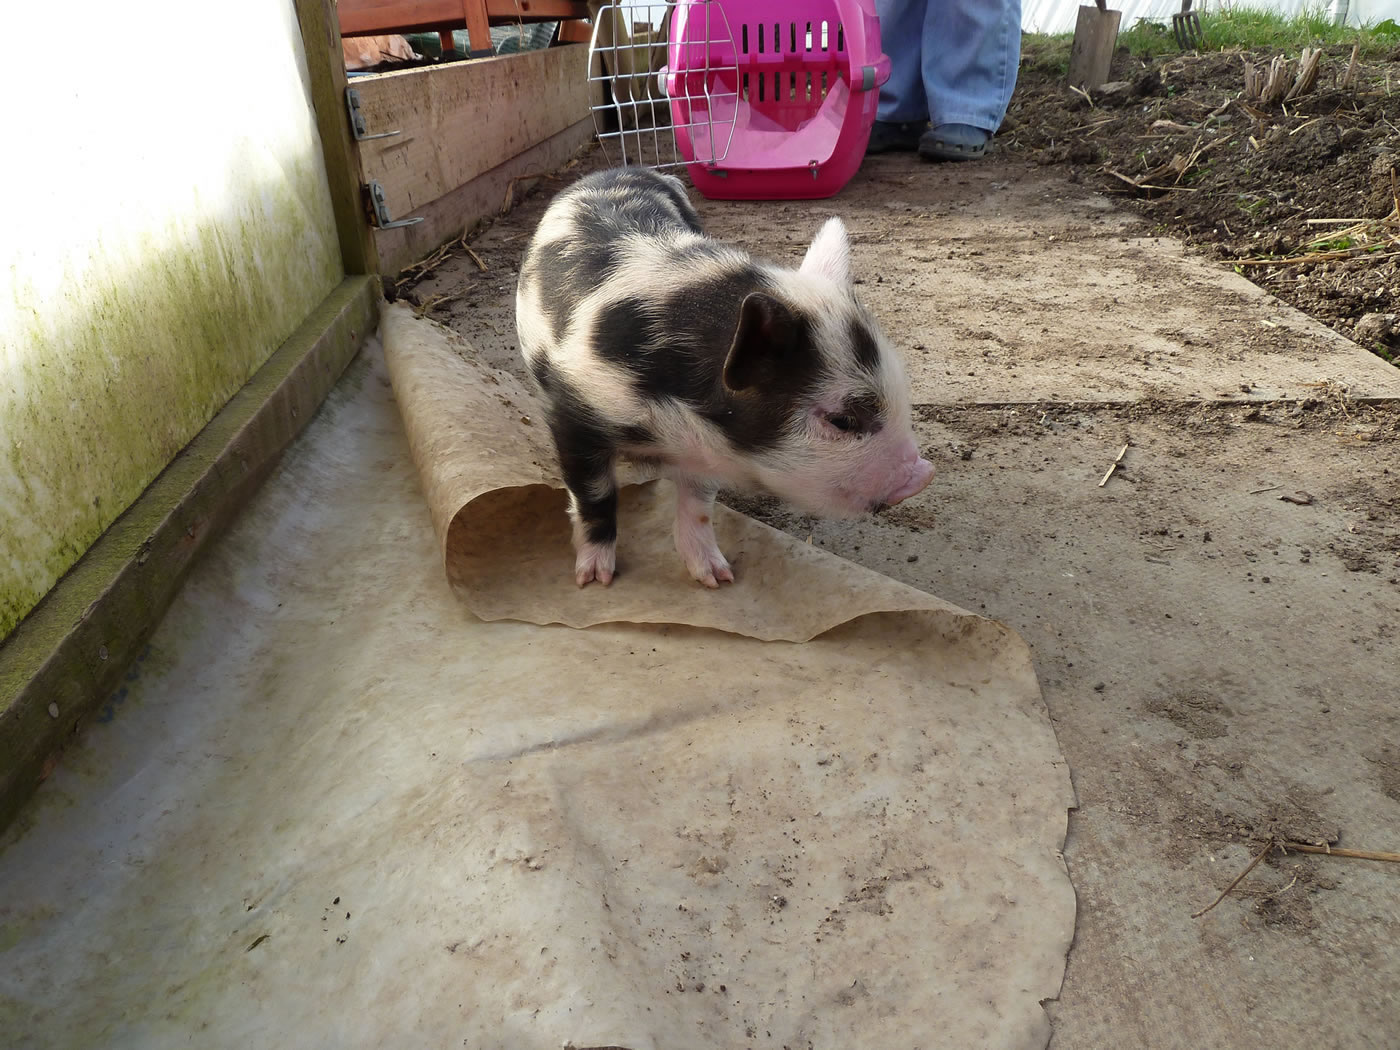 15 day old Pet pig now getting outside for short periods